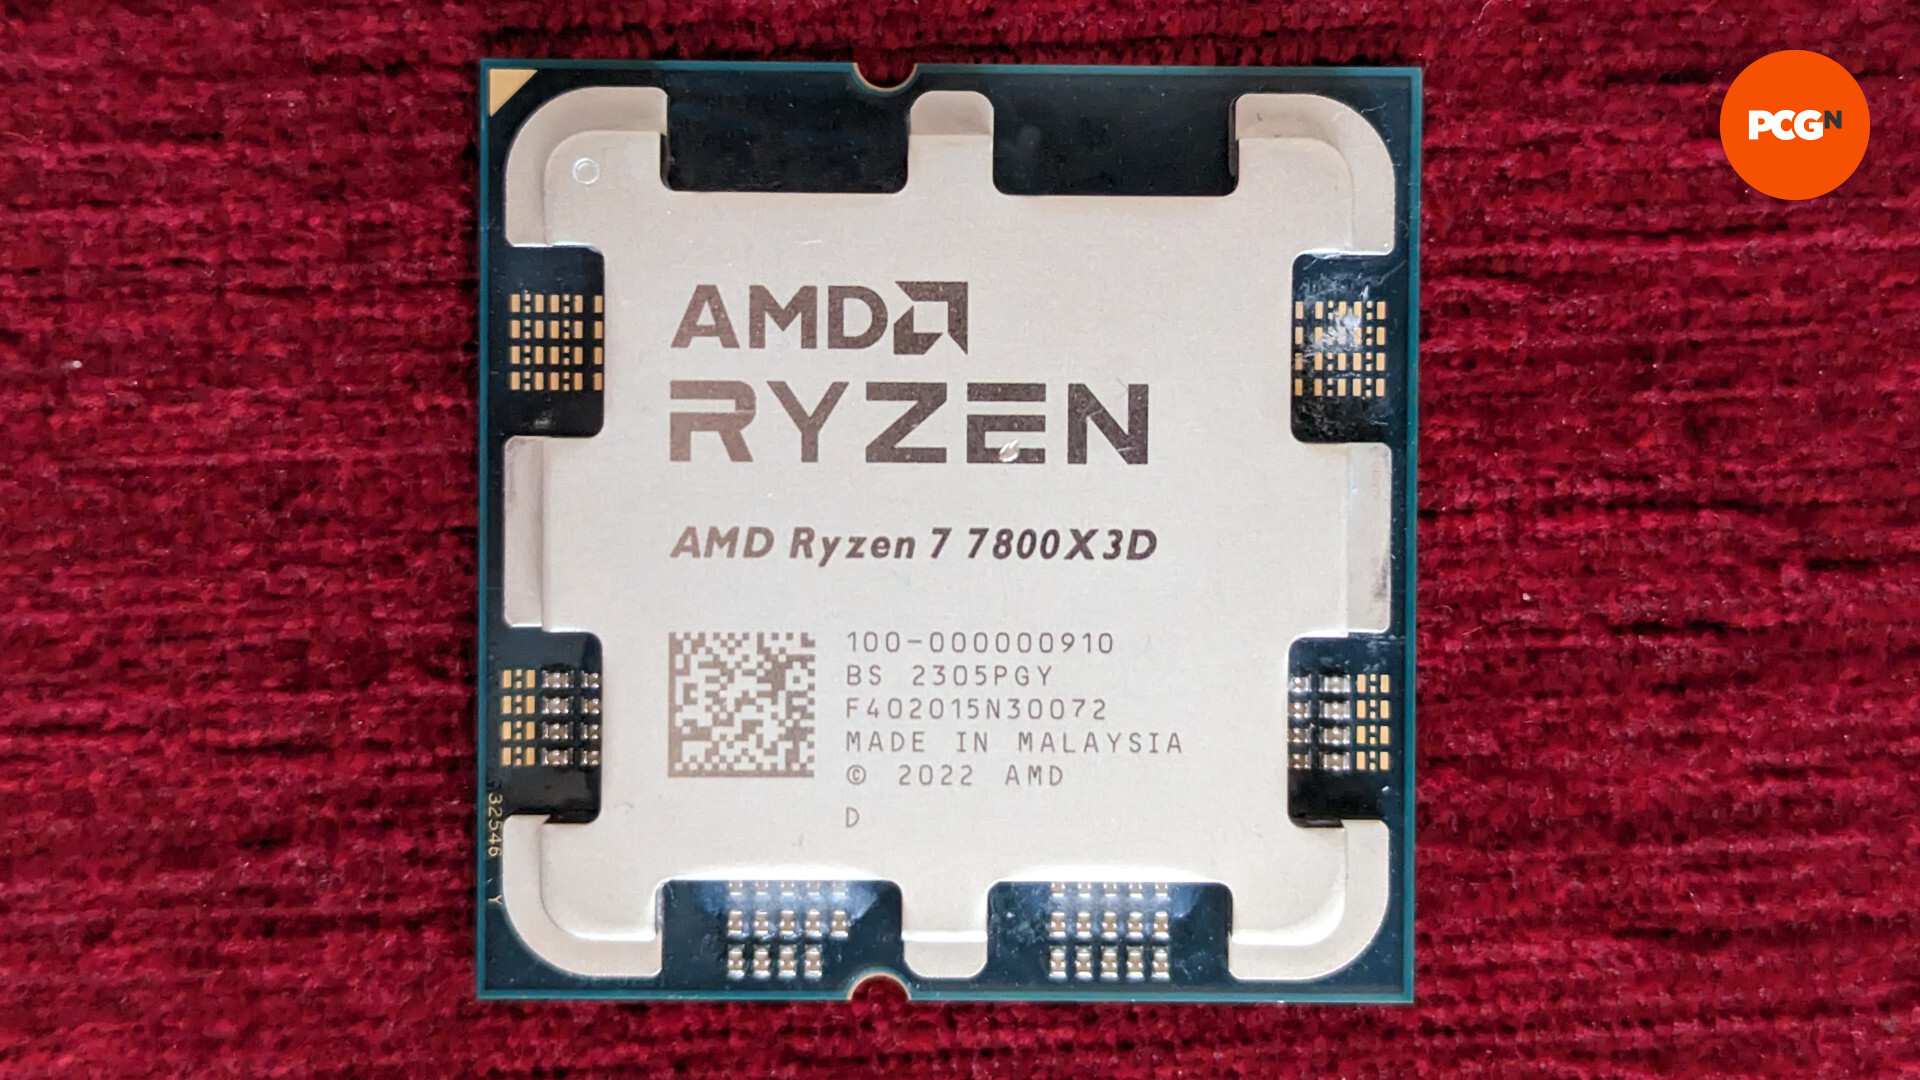 AMD Ryzen 7 7800X3D review: The CPU rests against a red surface